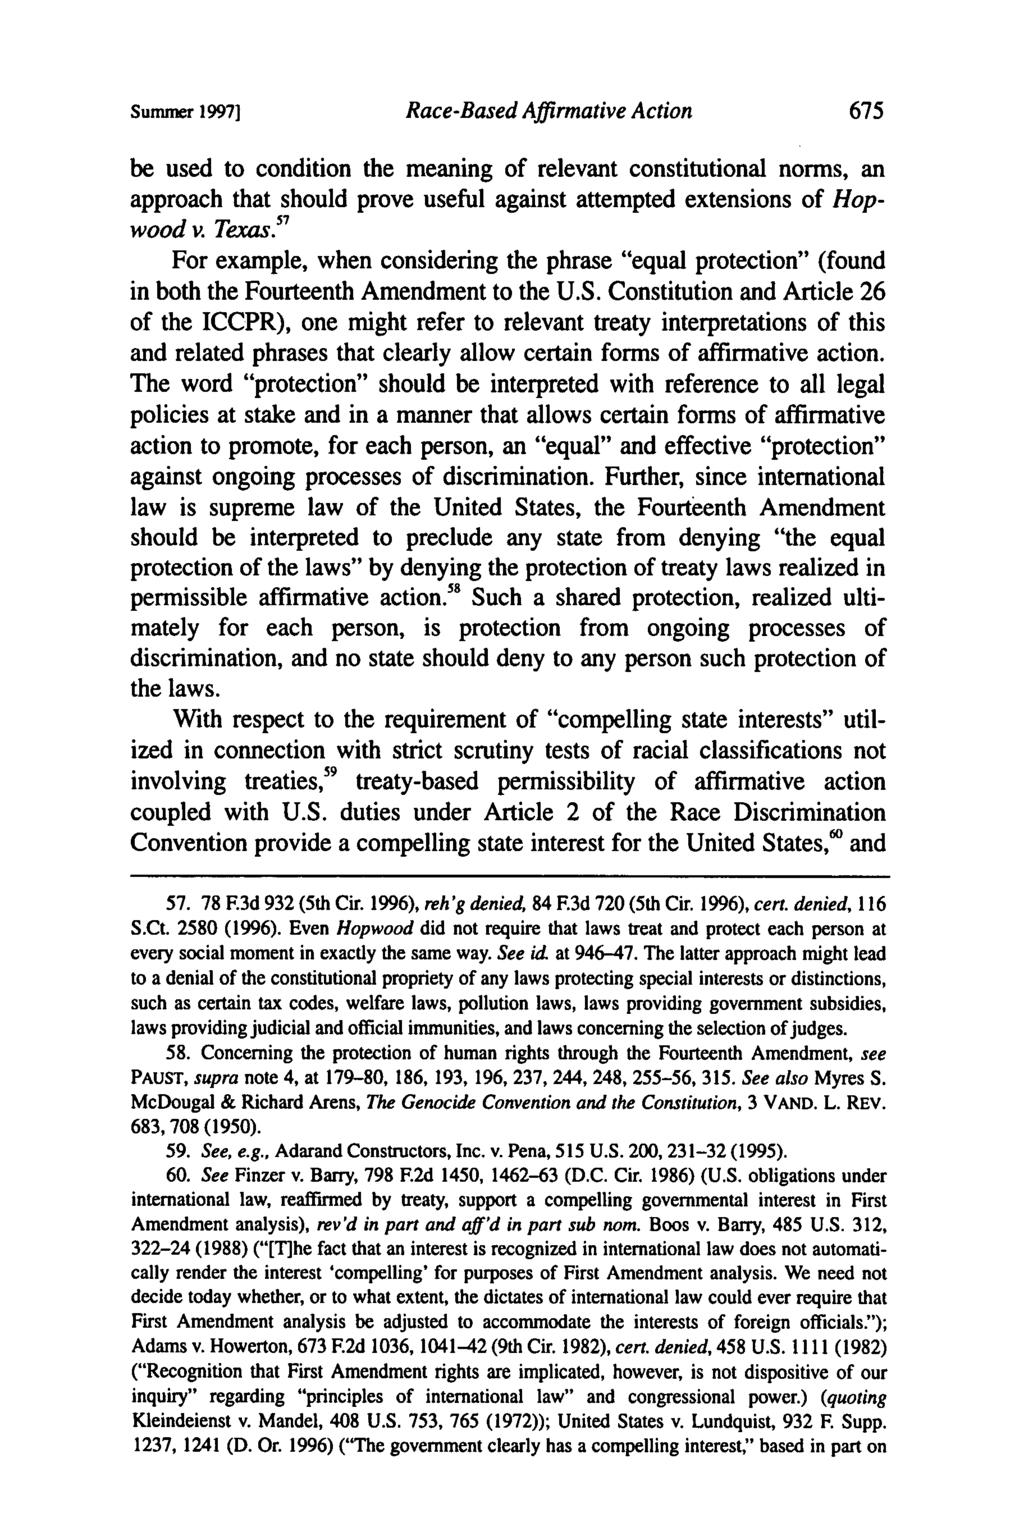 Summer 19971 Race-Based Affirmative Action be used to condition the meaning of relevant constitutional norms, an approach that should prove useful against attempted extensions of Hopwood v. Texas.